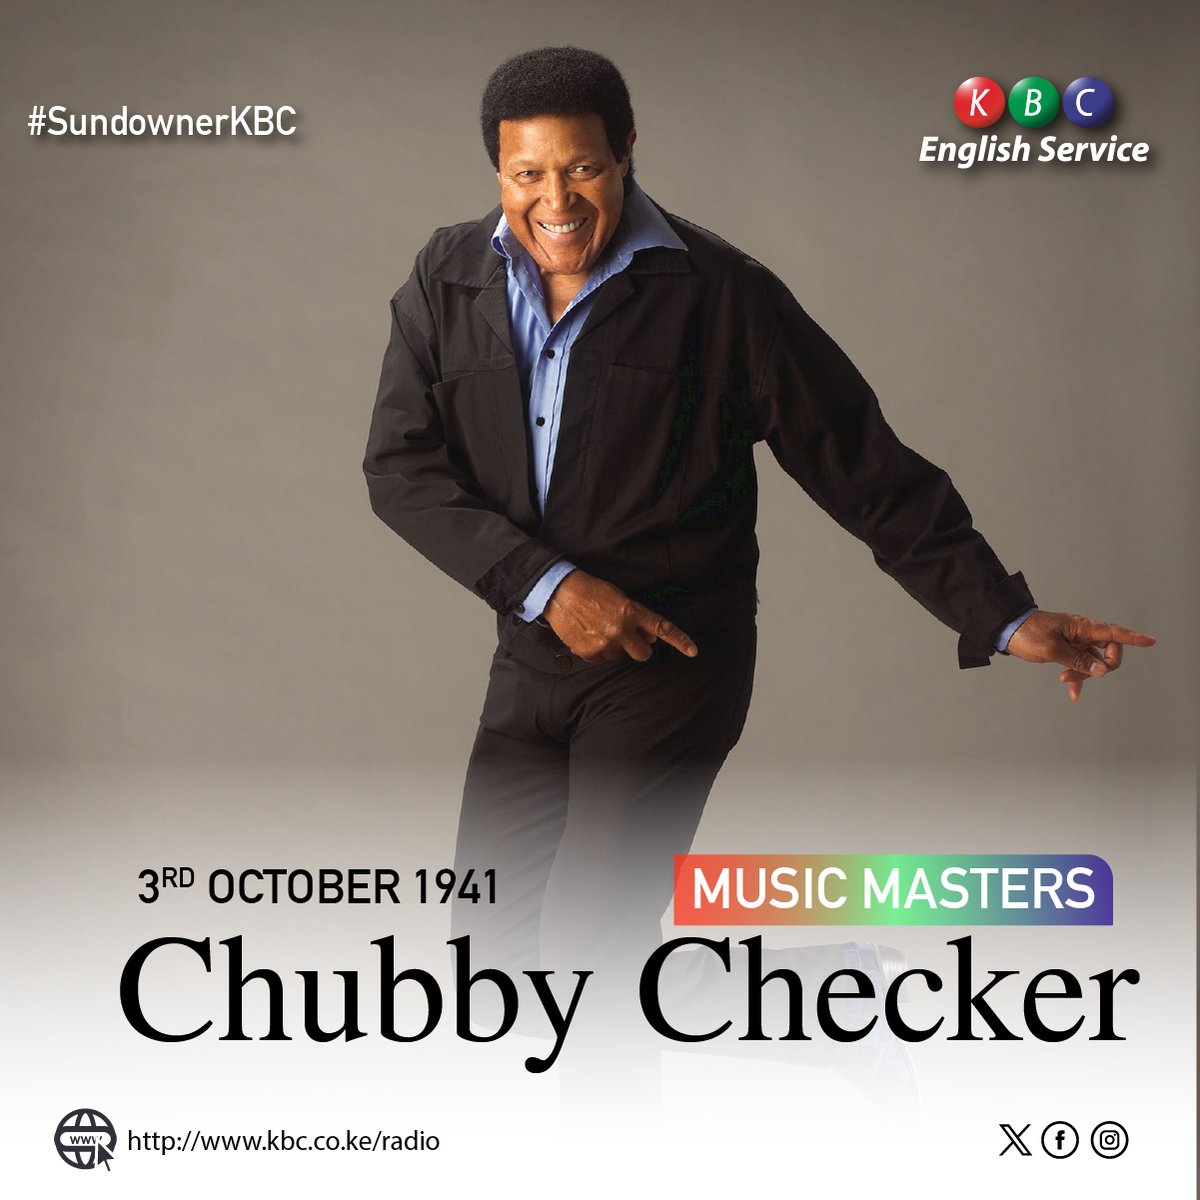 MUSIC MASTERS Chubby Checker An American singer & dancer. Widely known for popularizing many dance styles; the Twist dance, with his 1960 hit cover of Hank Ballard & The Midnighters', 'The Twist', & the pony dance with the 1961 cover of the song 'Pony Time'. ^PMN #SundownerKBC